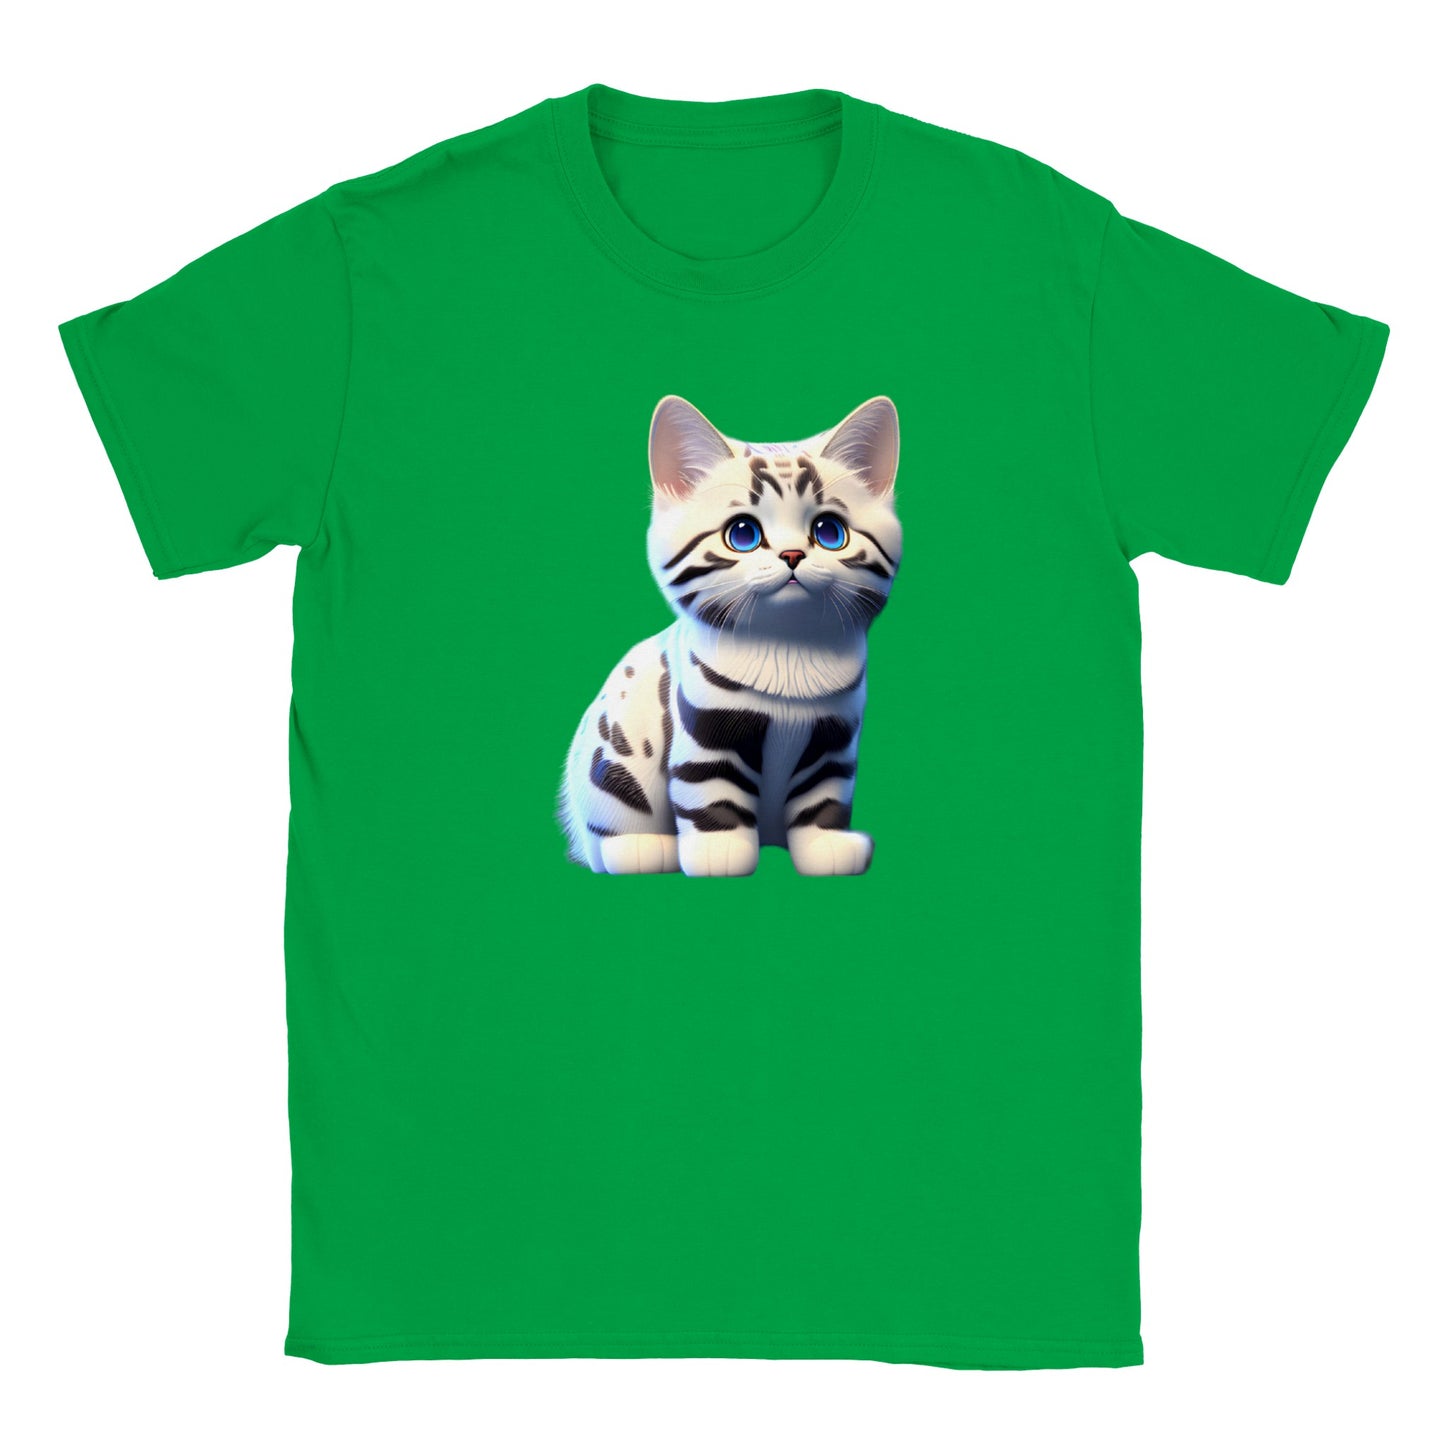 Adorable, Cool, Cute Cats and Kittens Toy - Classic Kids Crewneck T-Shirt 46